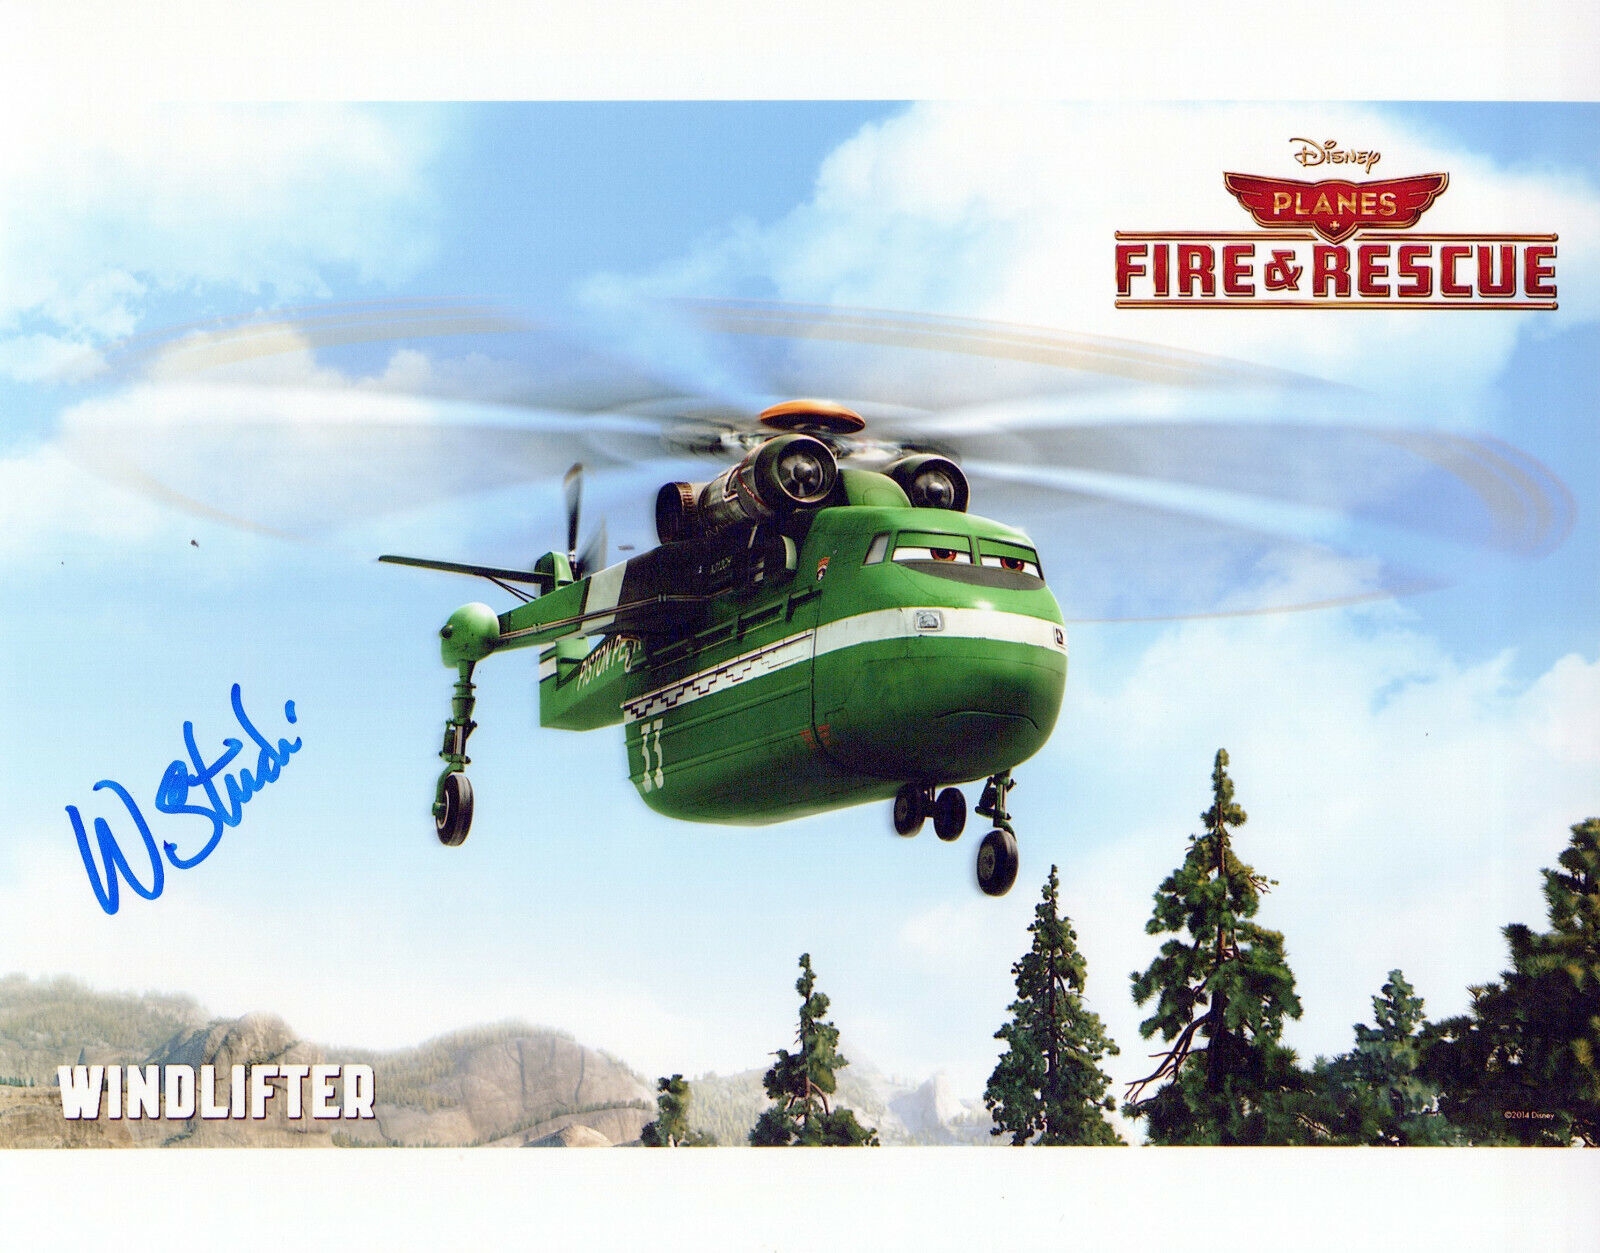 Wes Studi Planes: Fire & Rescue autographed Photo Poster painting signed 8x10 #2 Windlifter rare